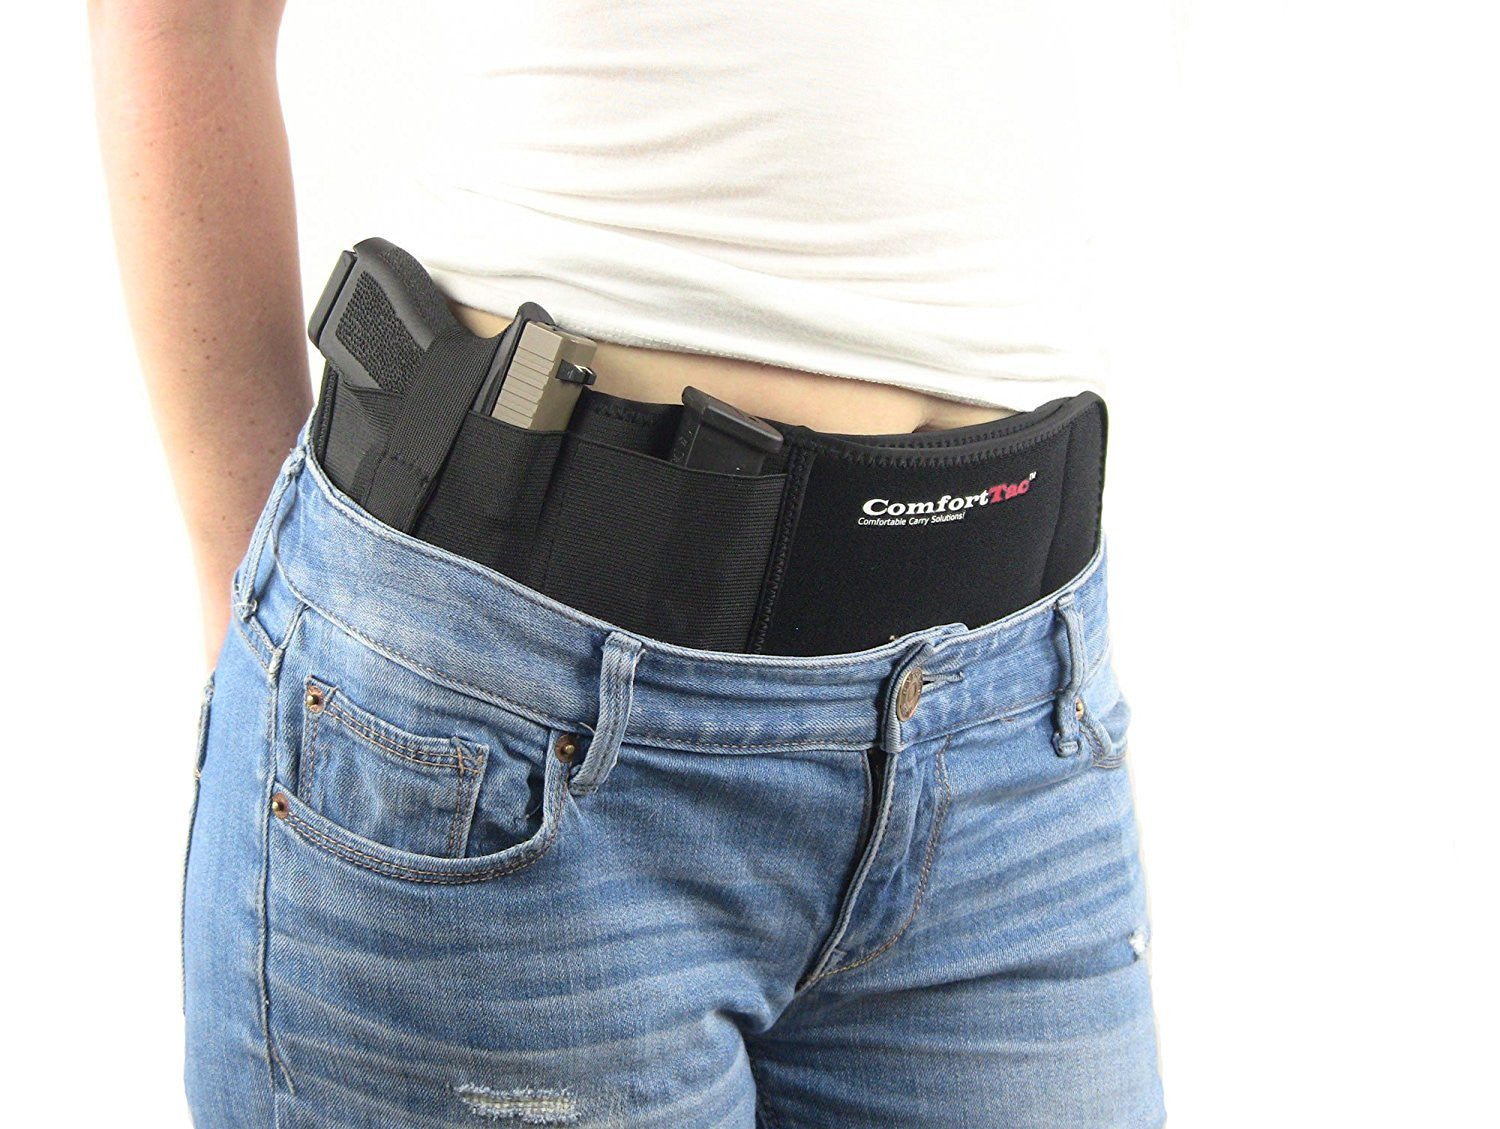 XL Ultimate Belly Band Holster for Concealed Carry, Black, Fits Gun Smith  and Wesson Bodyguard, Glock 19, 17, 42, 43, P238, Ruger LCP, and Similar  Sized Guns